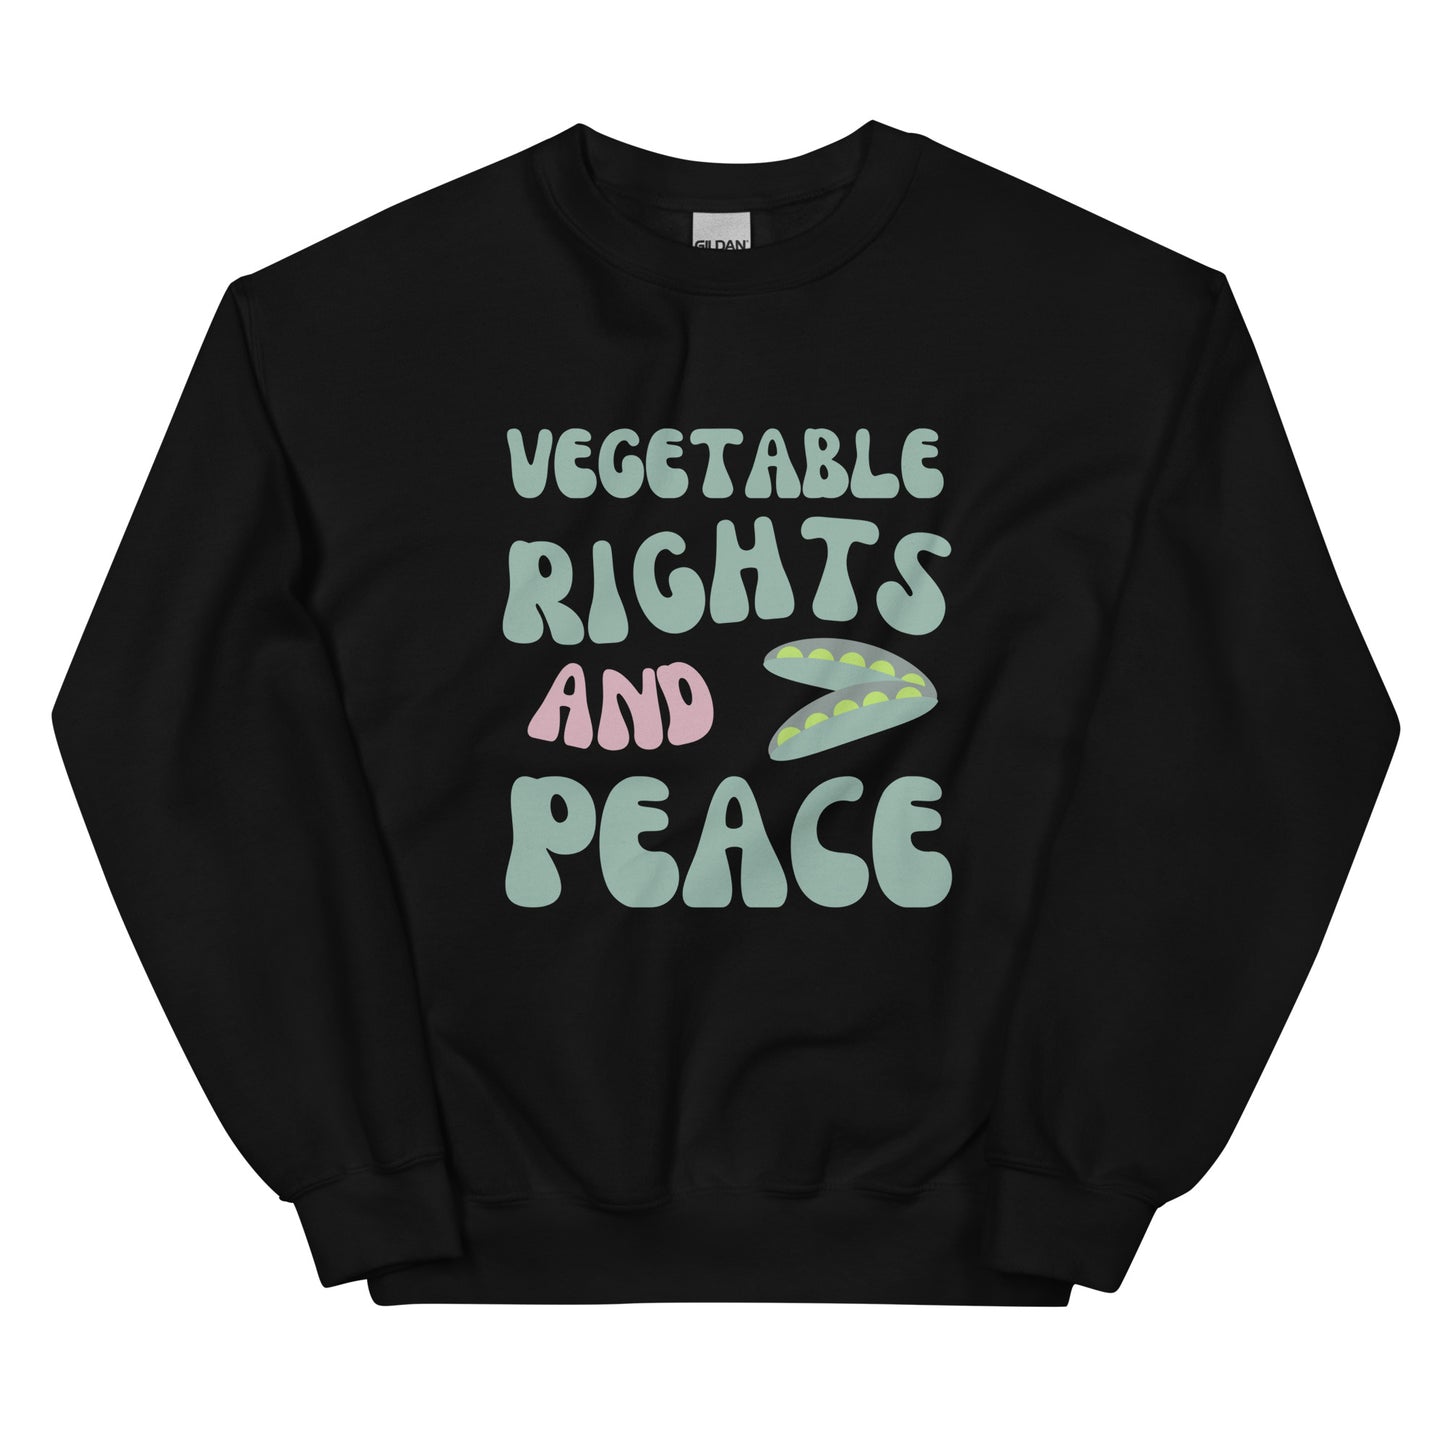 Vegetable Rights and Peace Comedy Quote Sweatshirt